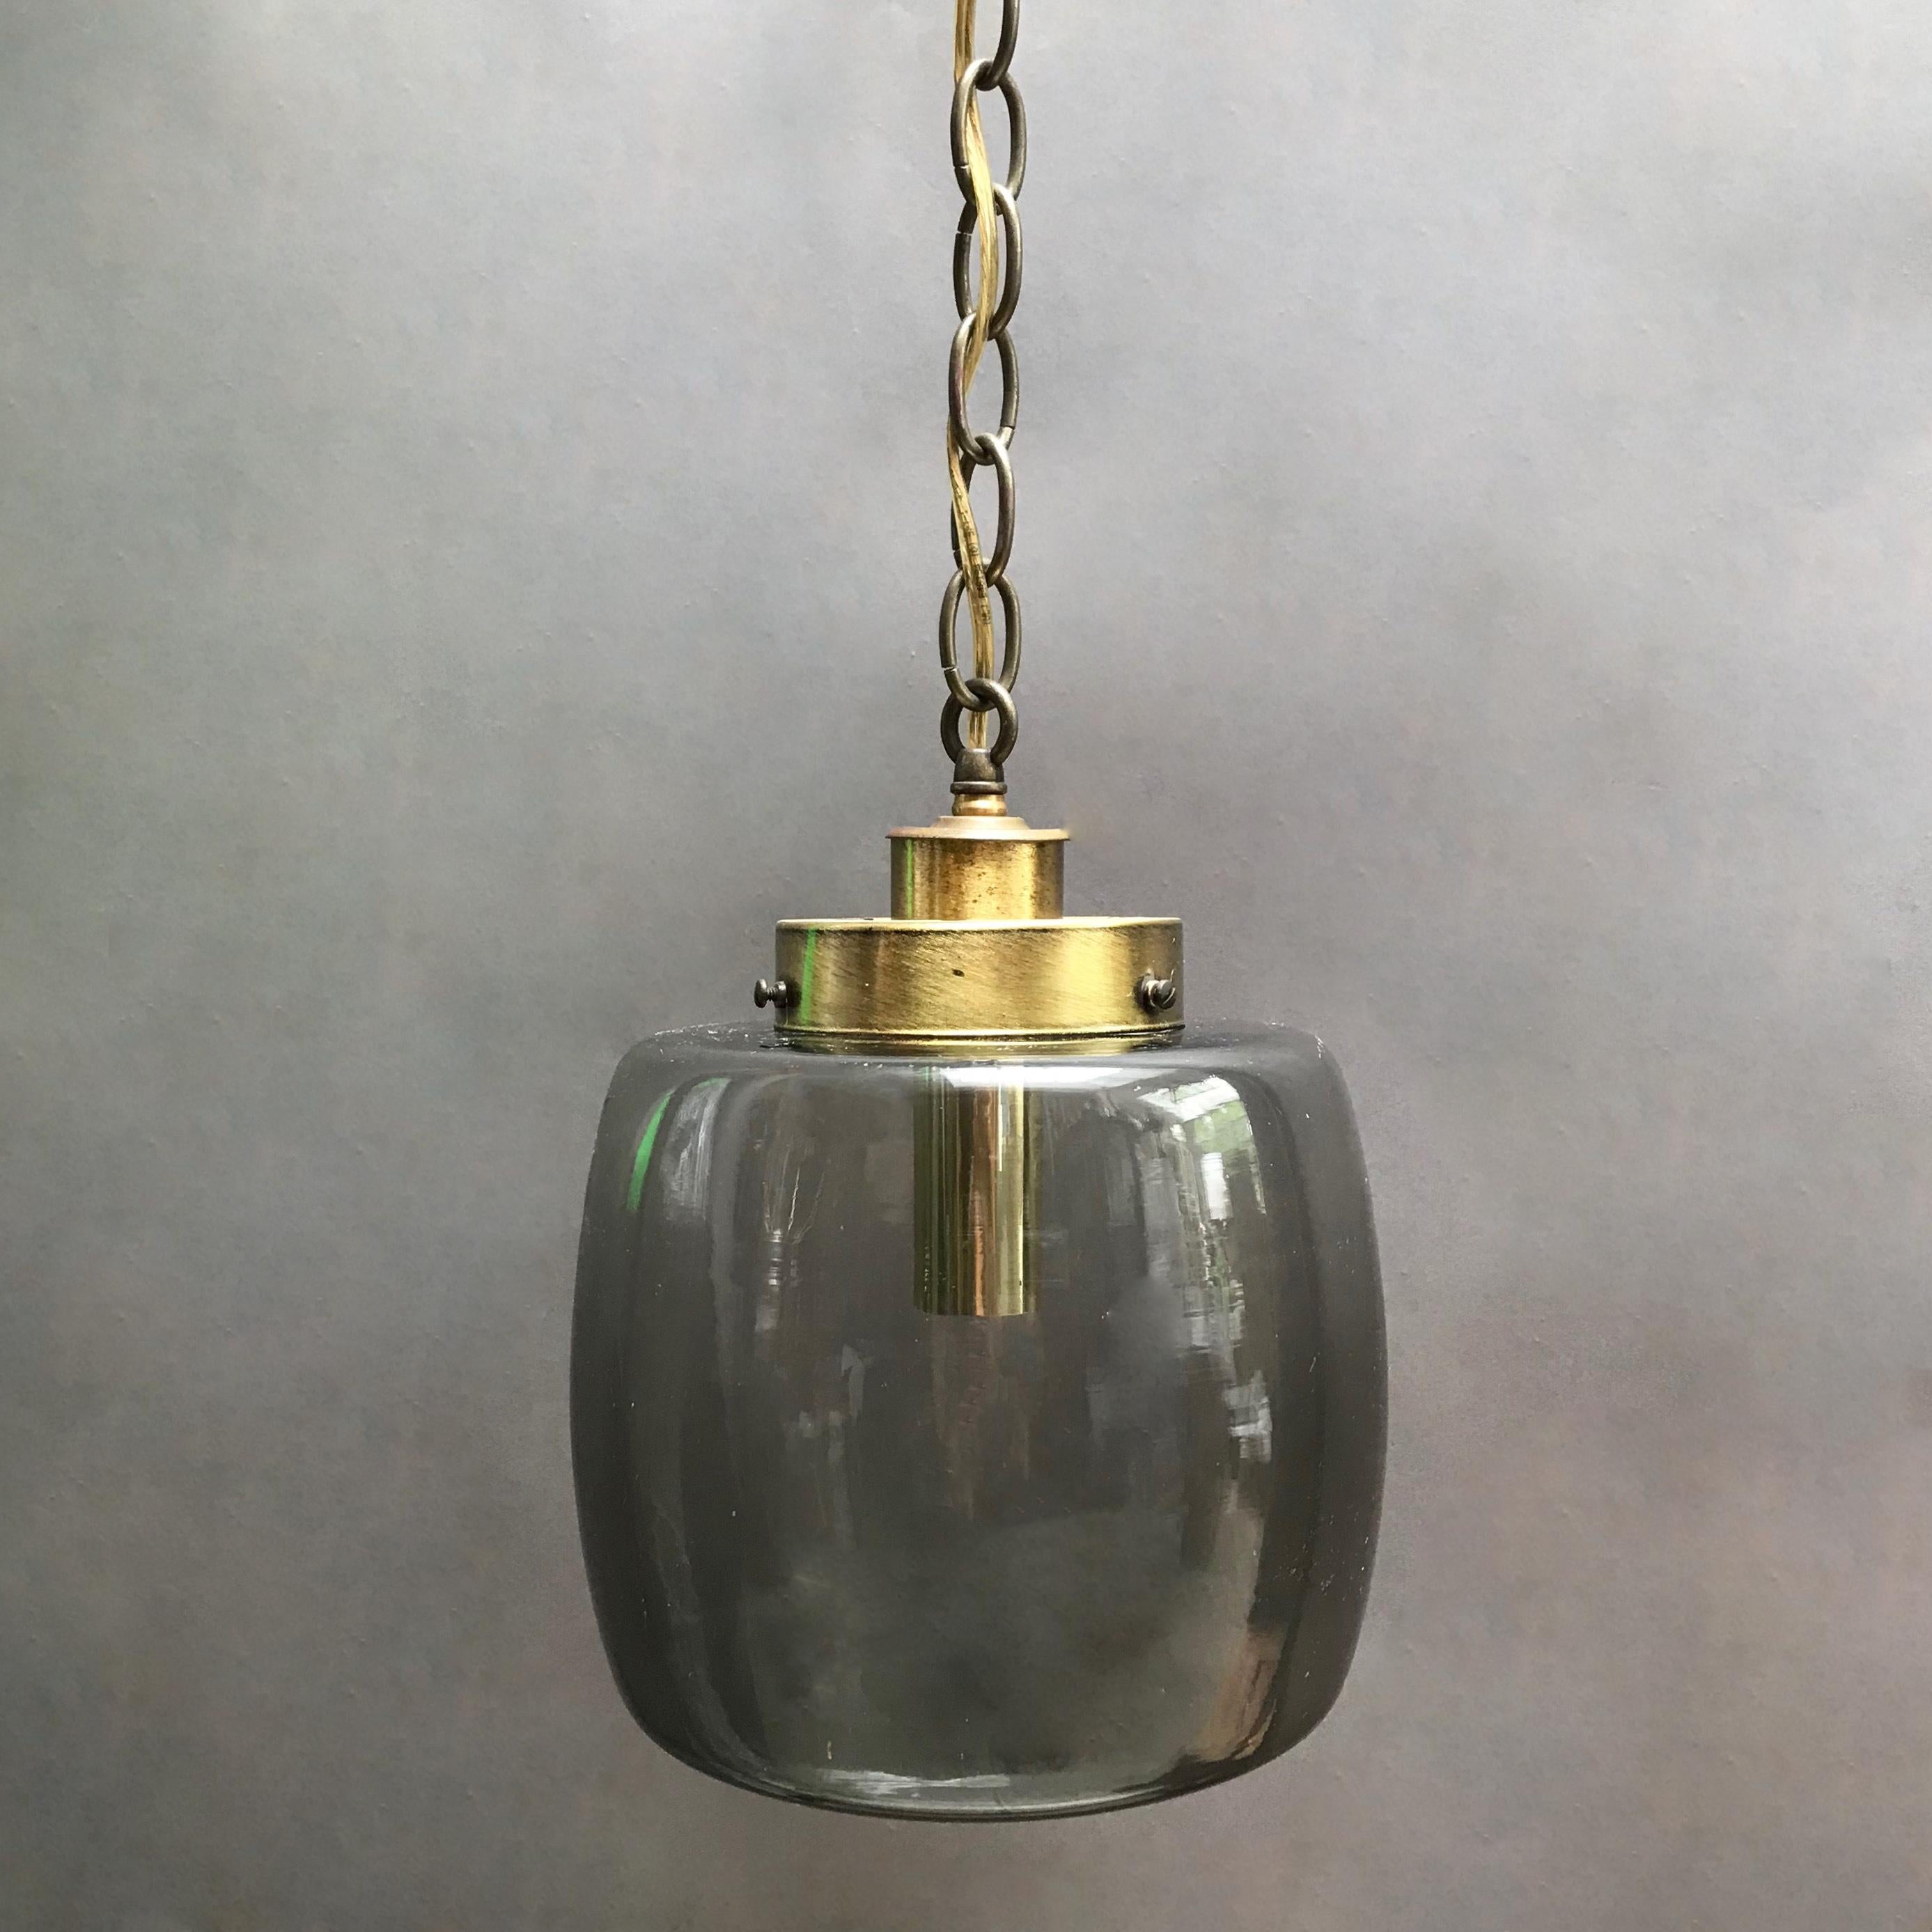 Mid-Century Modern, pendant light features a smoked glass closed lantern shade with brass fitter and 44 inches of brass chain wired to accept up to 150 watt bulb.